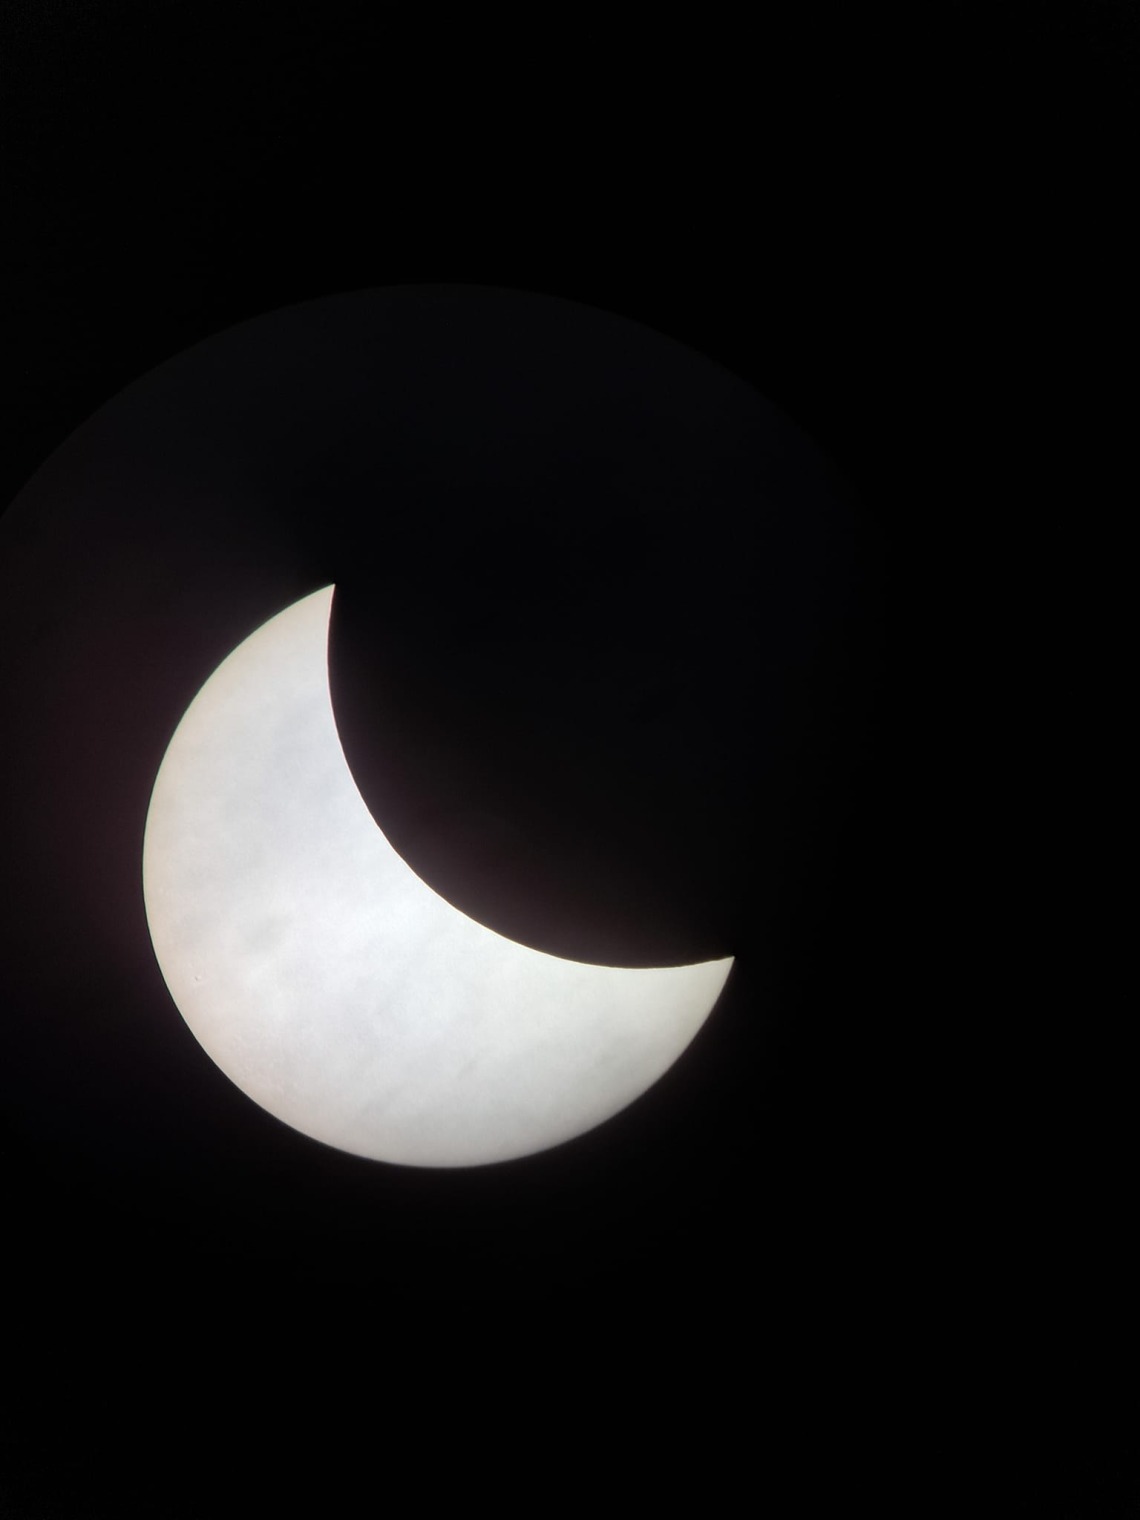 After Totality, Photo taken using a Meade Telescope with Solar Filter